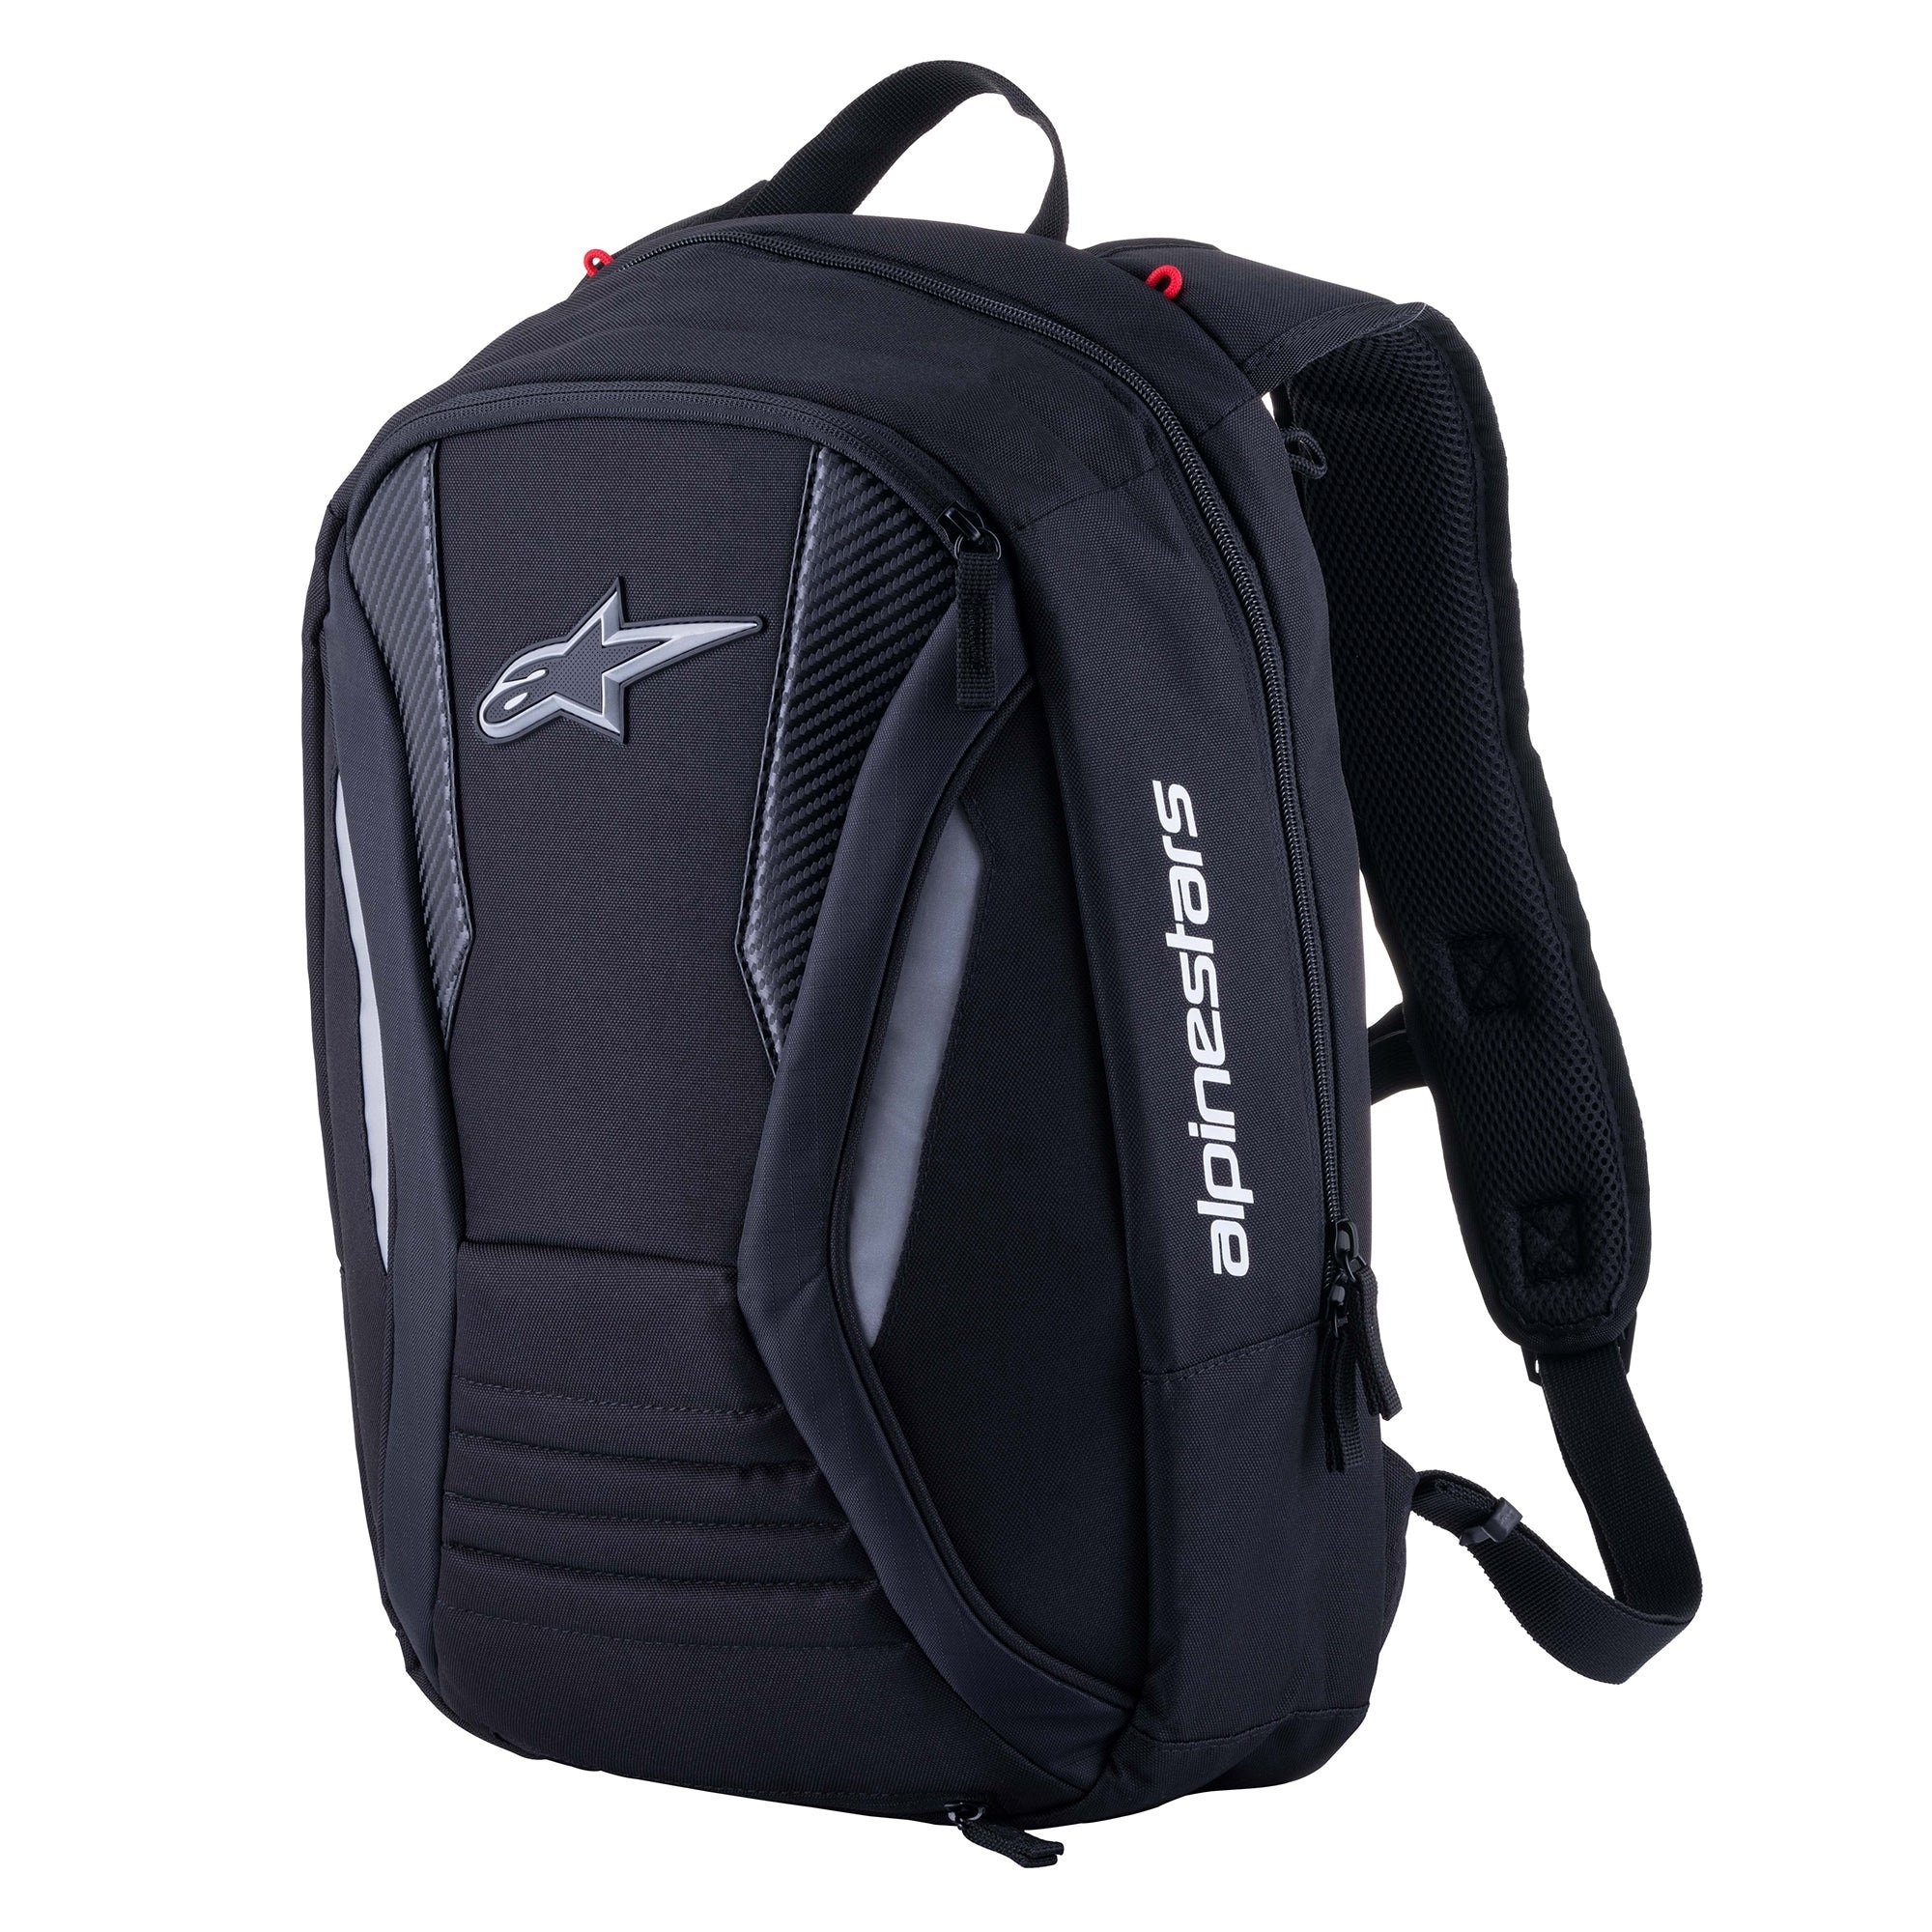 Buy Alpinestars Charger Boost Backpack Online with Free Shipping –  superbikestore